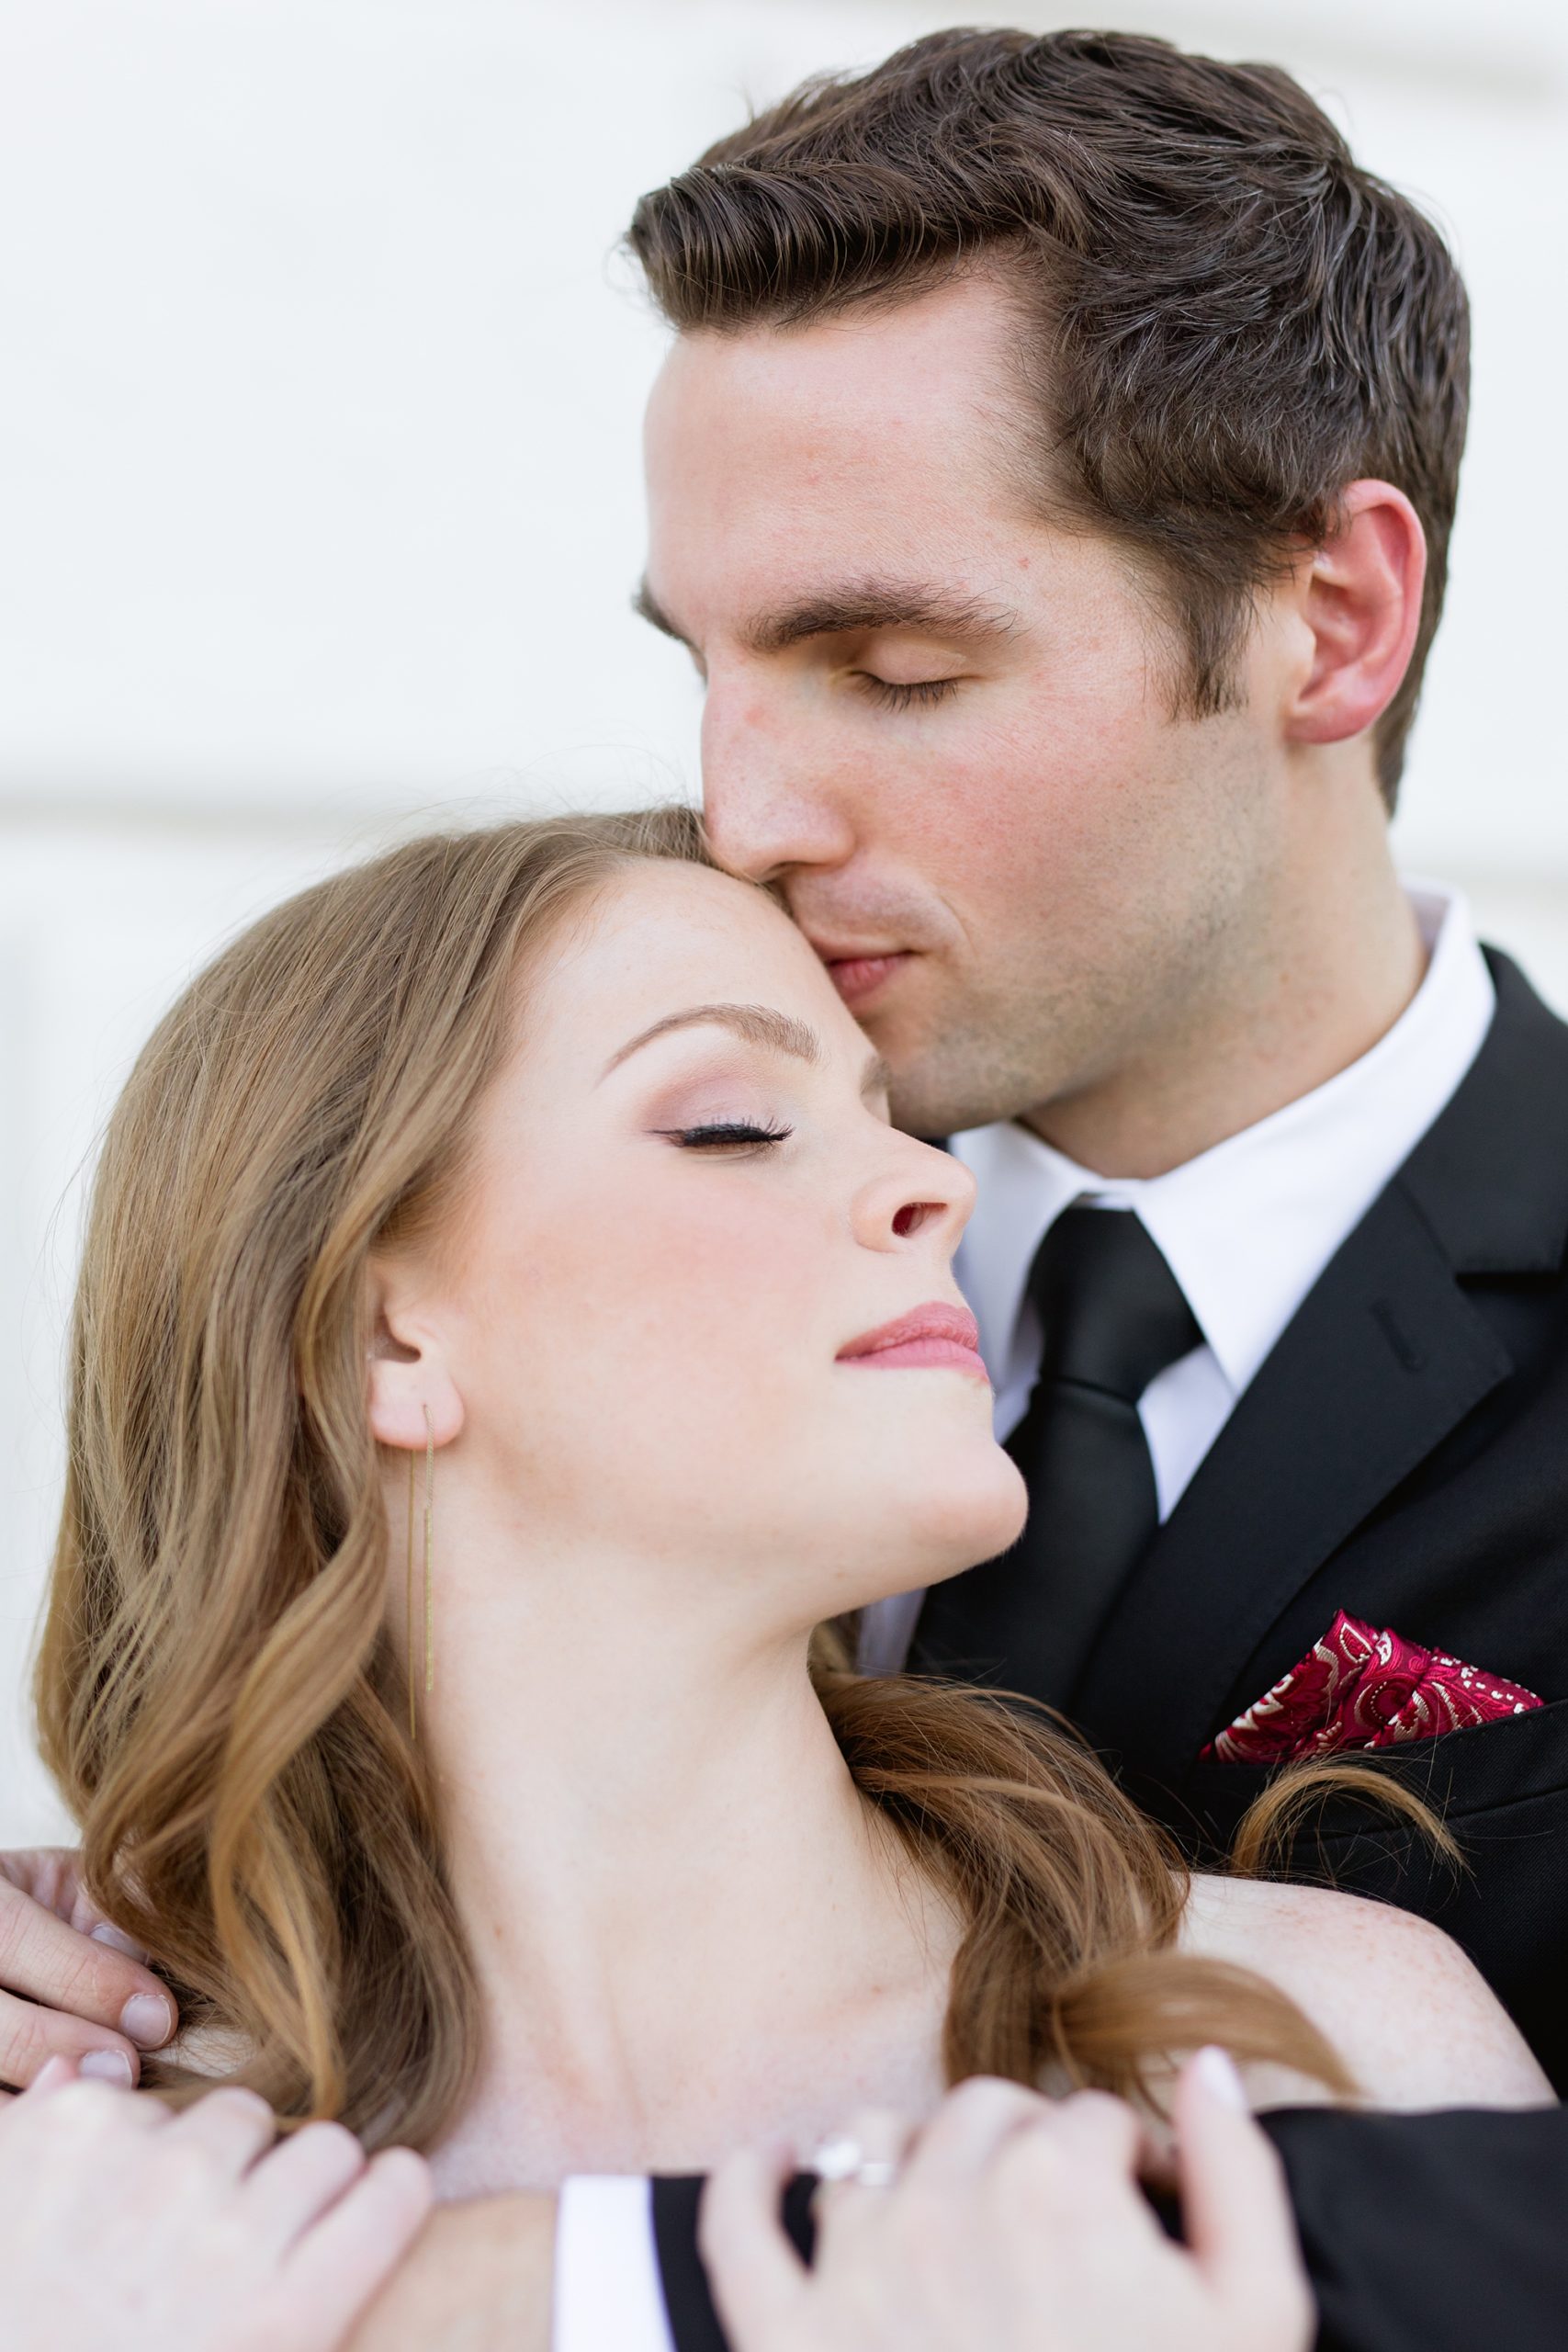 Kissing forehead pose for engagement photo | Breanne Rochelle Photography